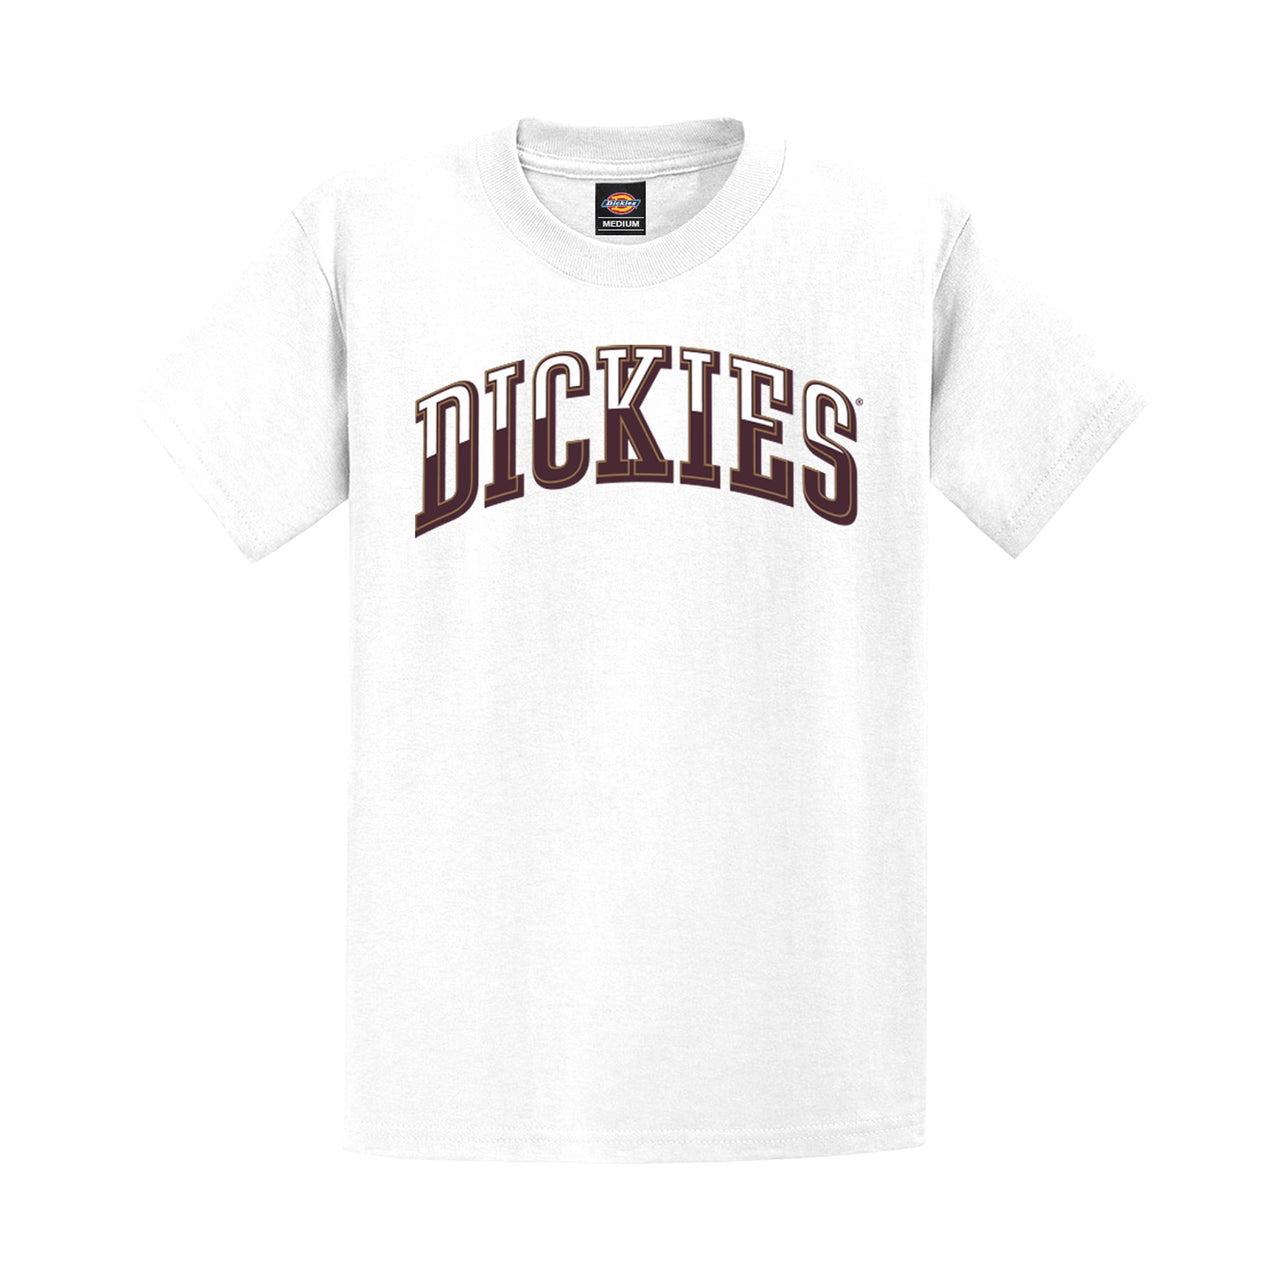 DICKIES - BIG LEAGUE CLASSIC FIT S/S TEE - WHITE